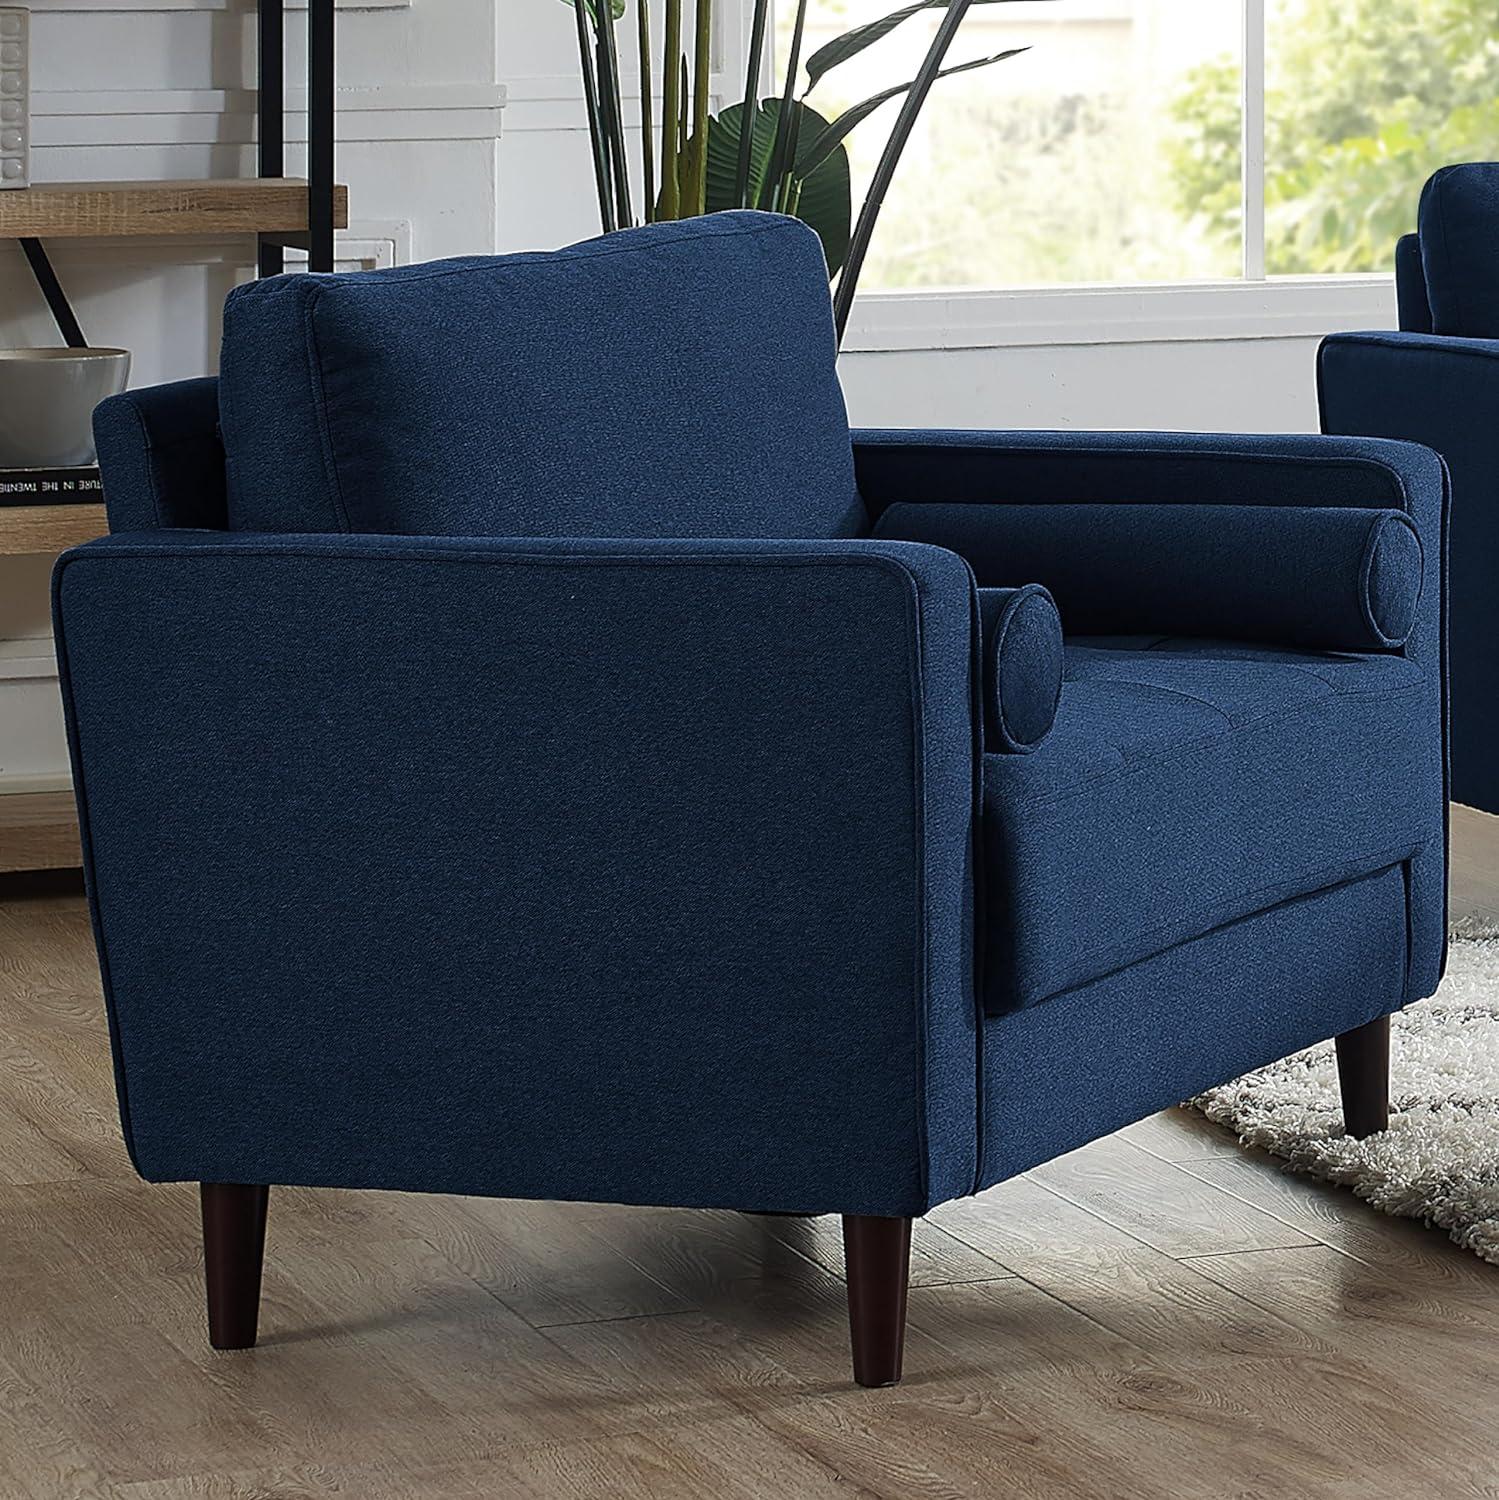 Elegant Navy Blue Microfiber Accent Chair with Wood Legs